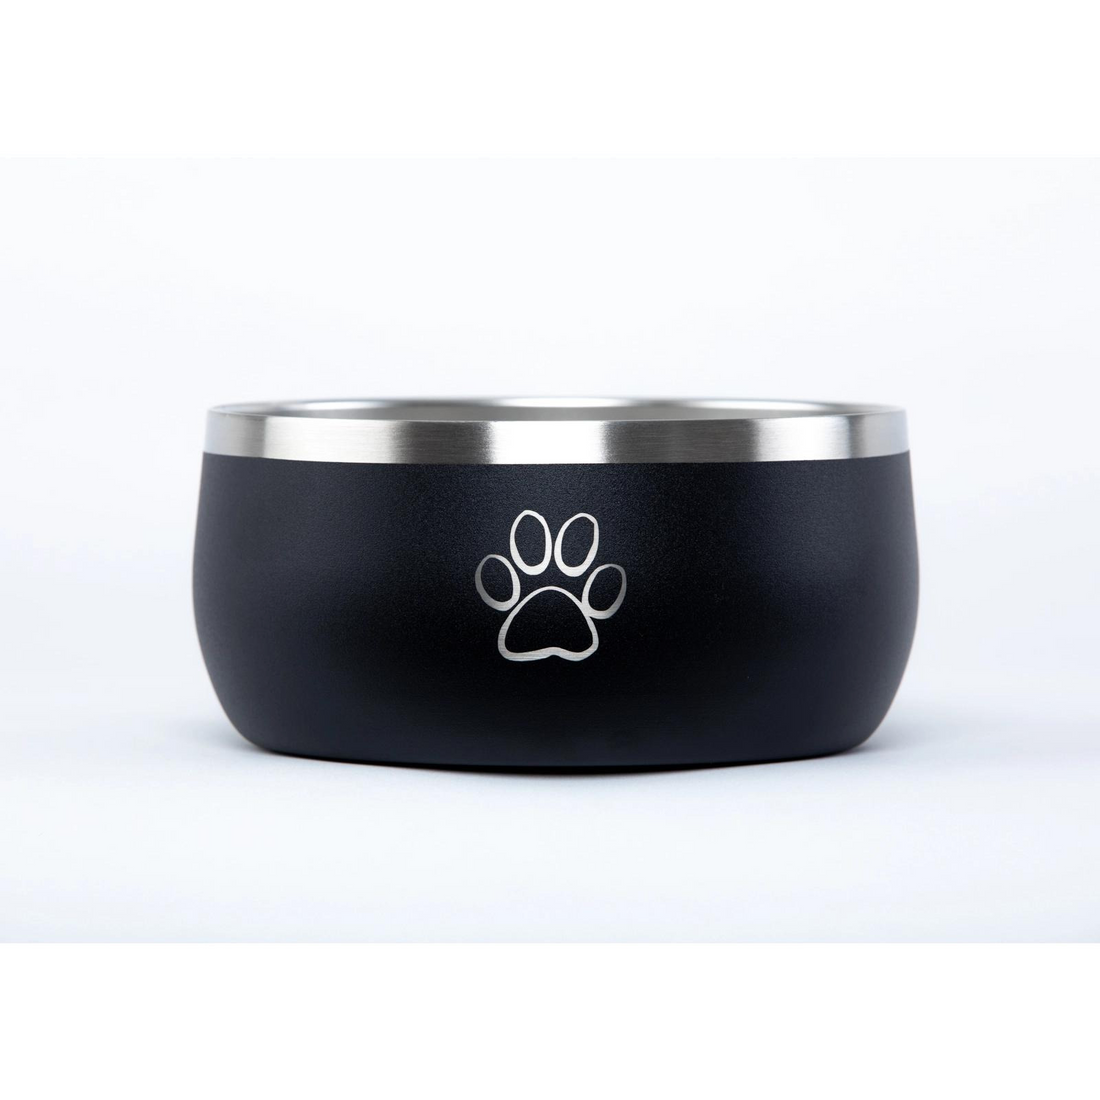 Picture of Good Life Gear SF7010 M Black 34 oz Double Wall Stainless Steel Pet Bowl, Powder Coat Black - Medium